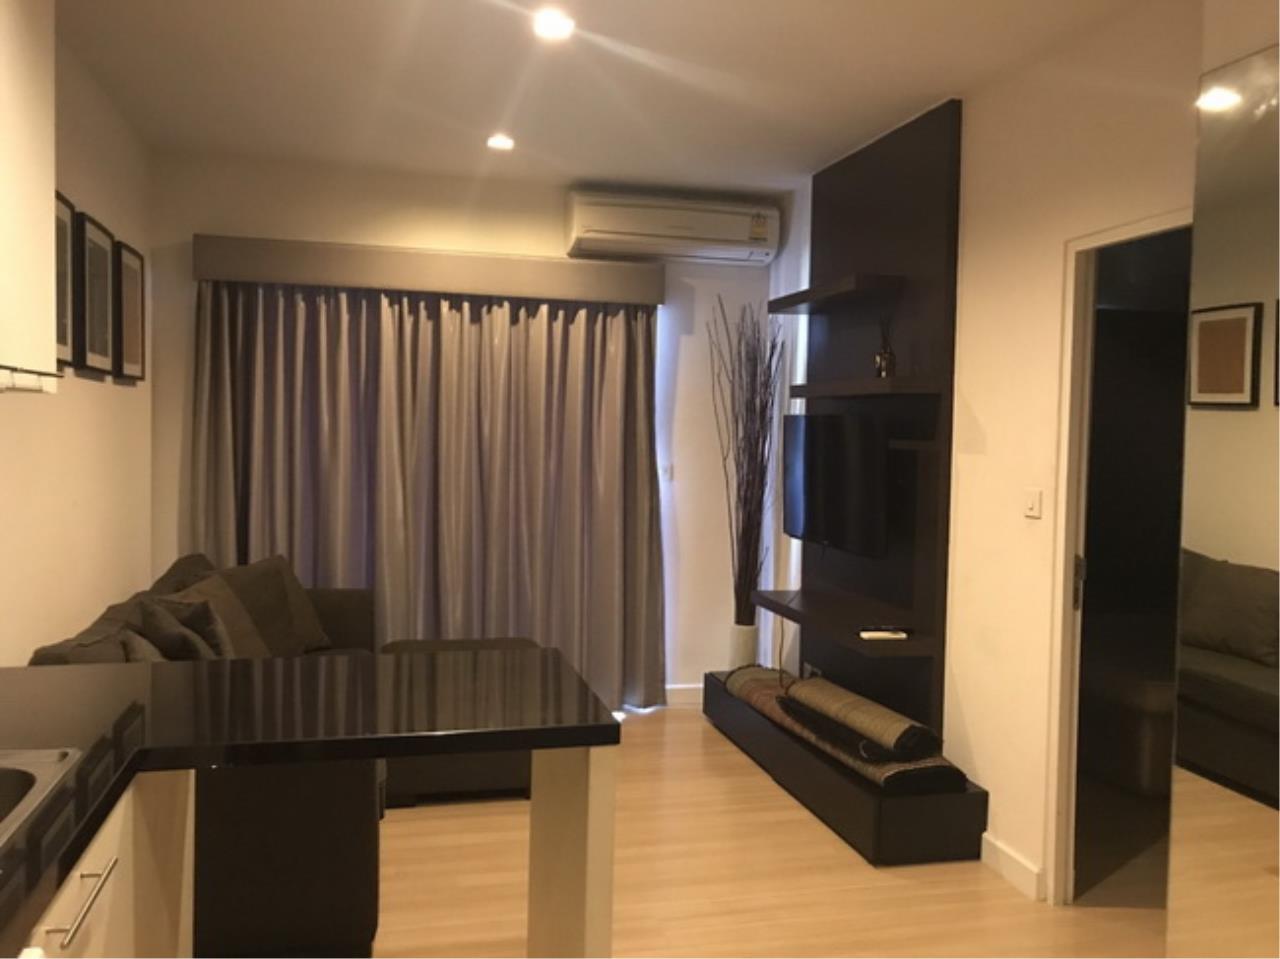 Forbest Properties Agency's 38159 - The Seed Mingle, Condominium for rent, Sathorn Road, area 43 sq.m. 6